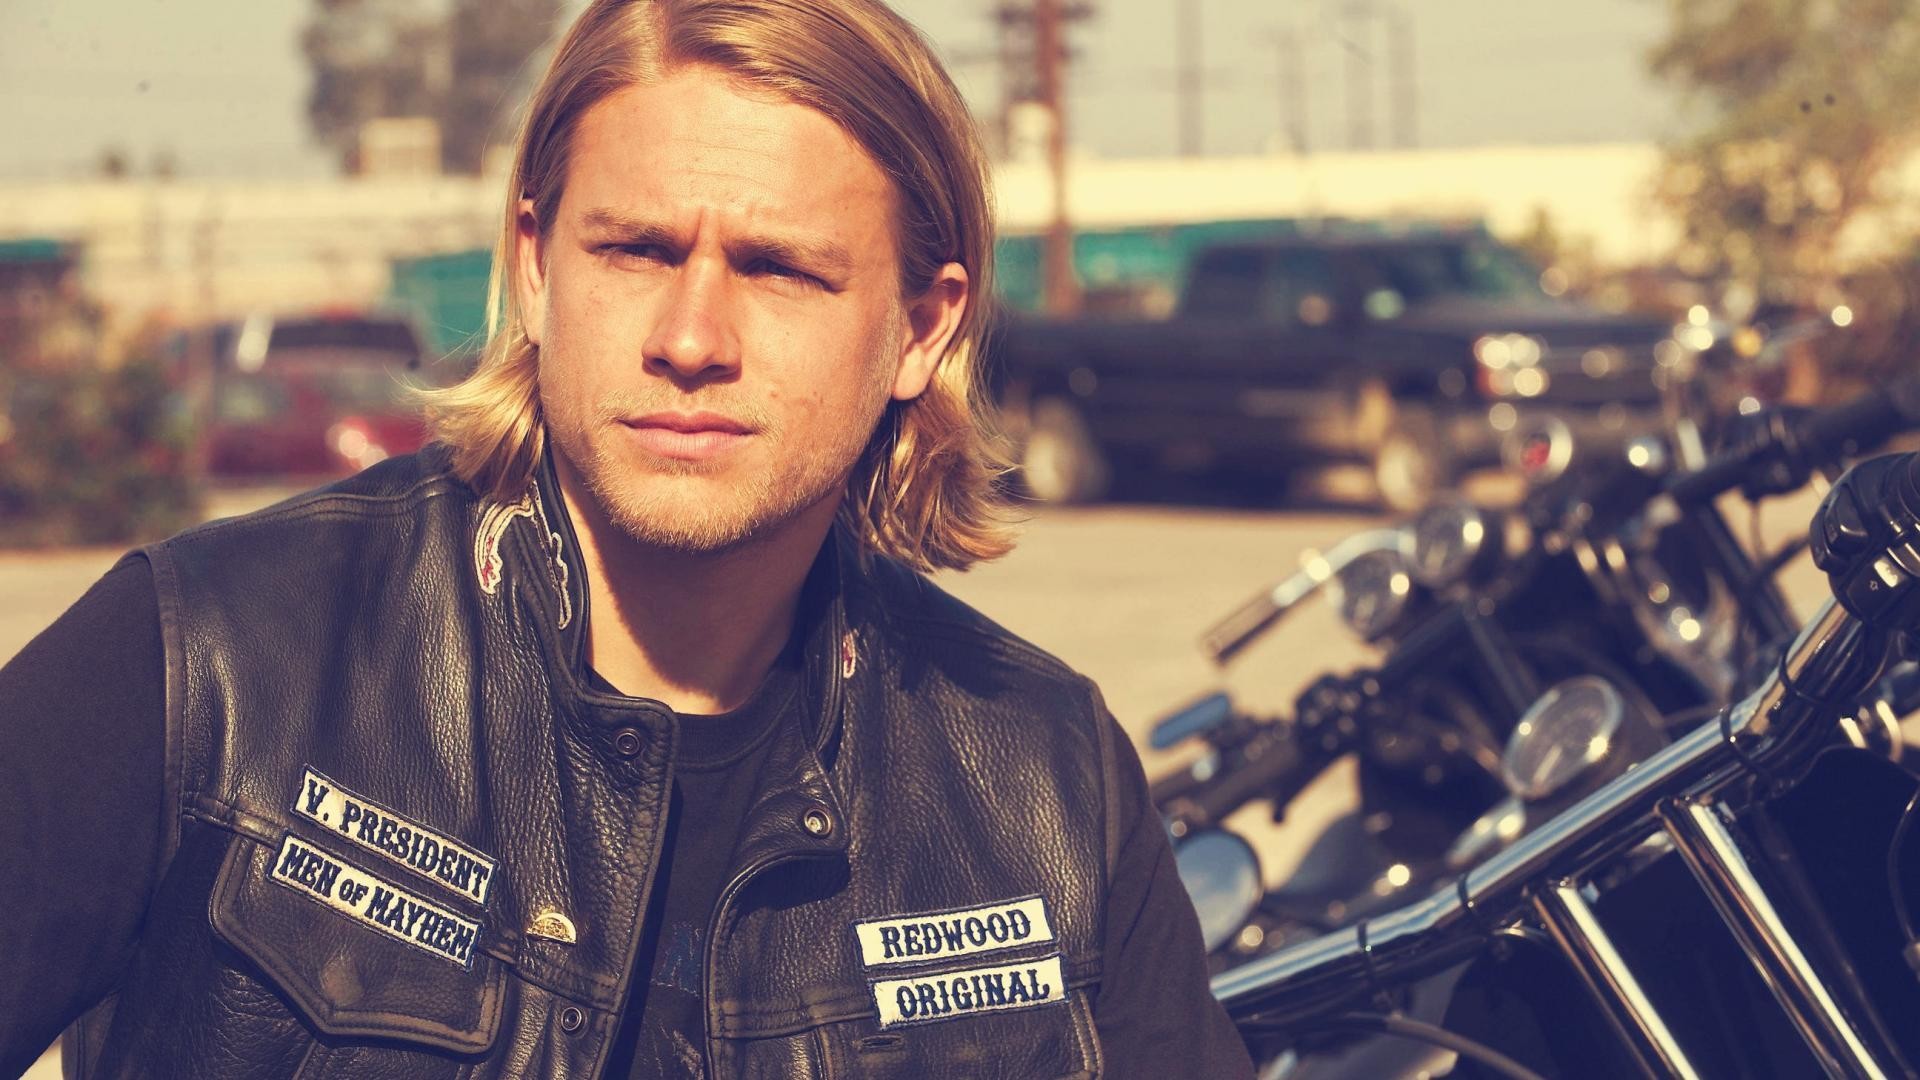 Charlie hunnam wallpaper pictures